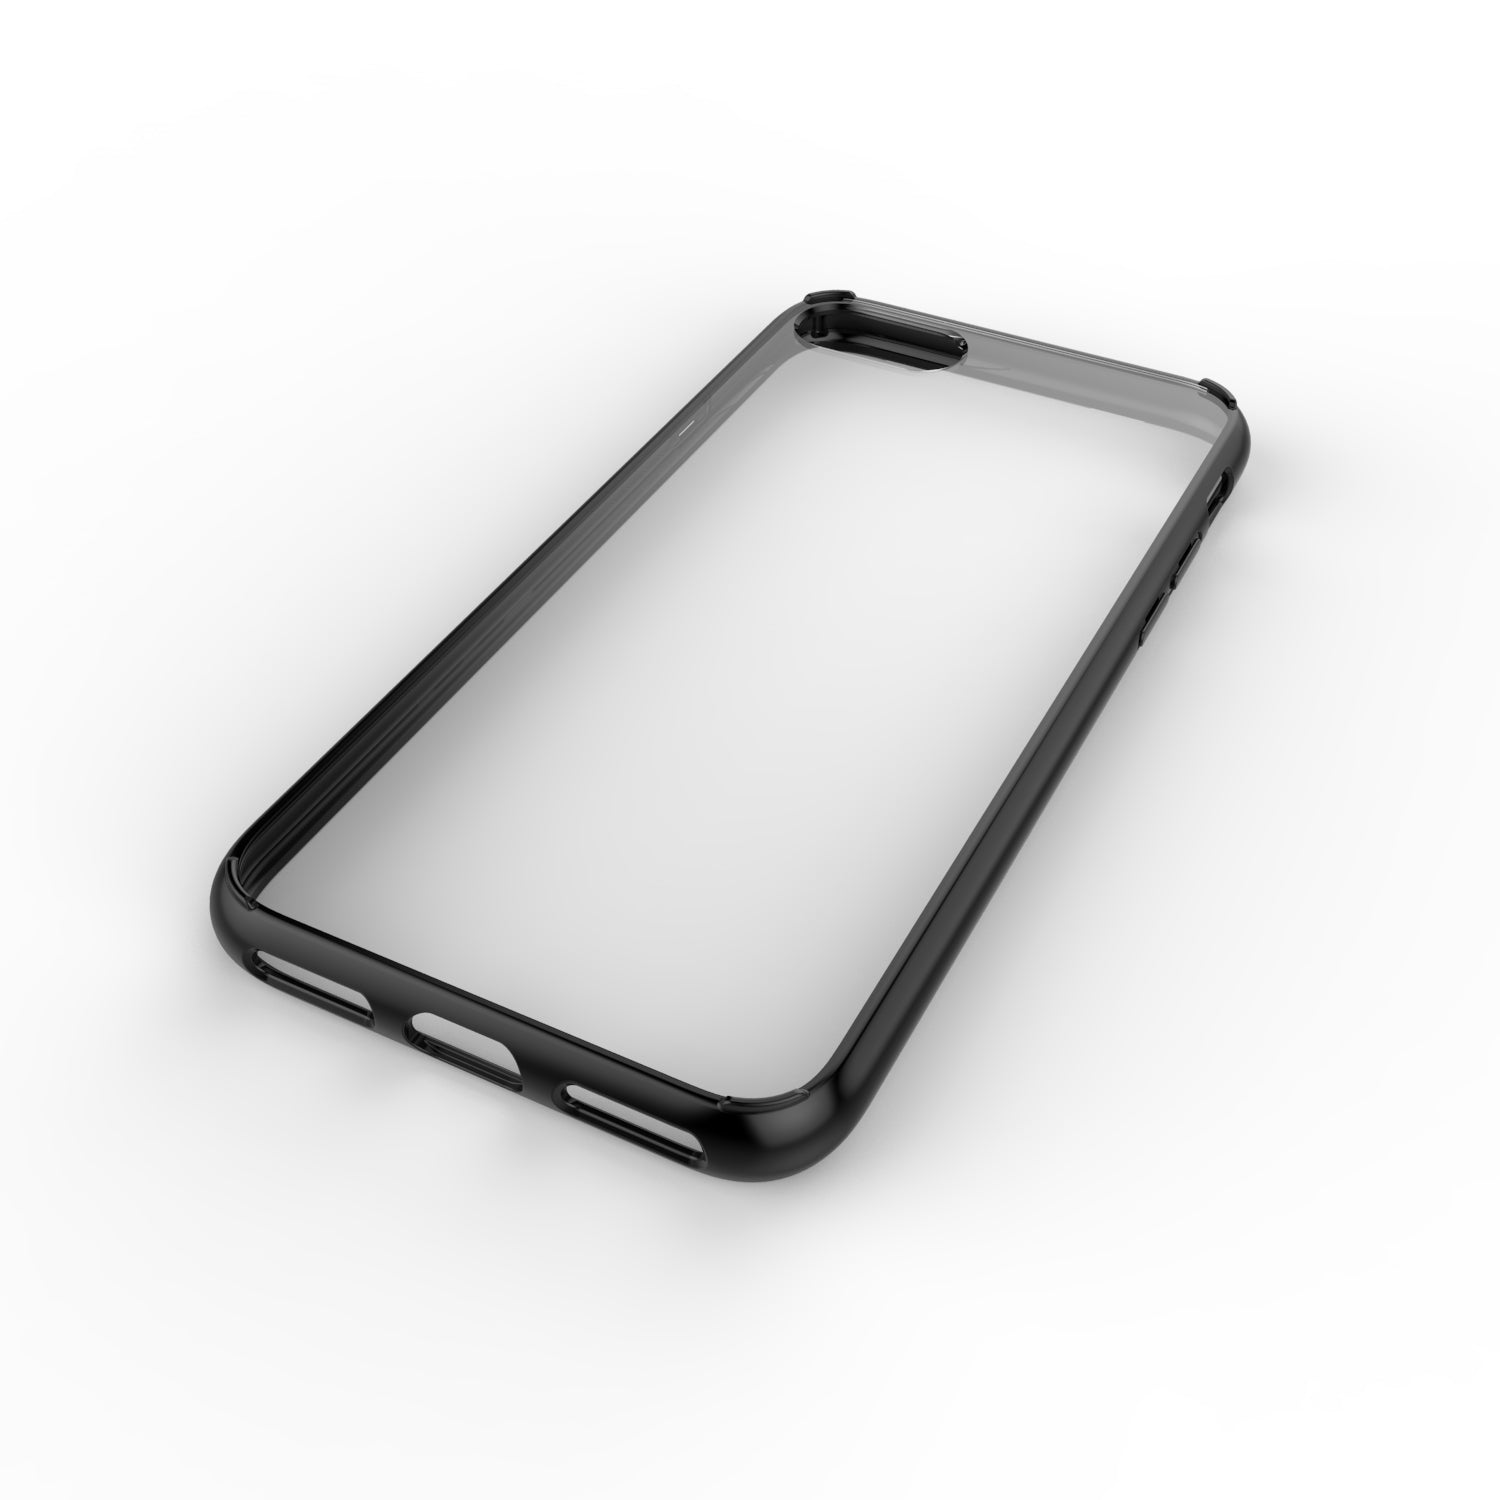 Luvvitt Clear View Hybrid Case for iPhone 8 - Black